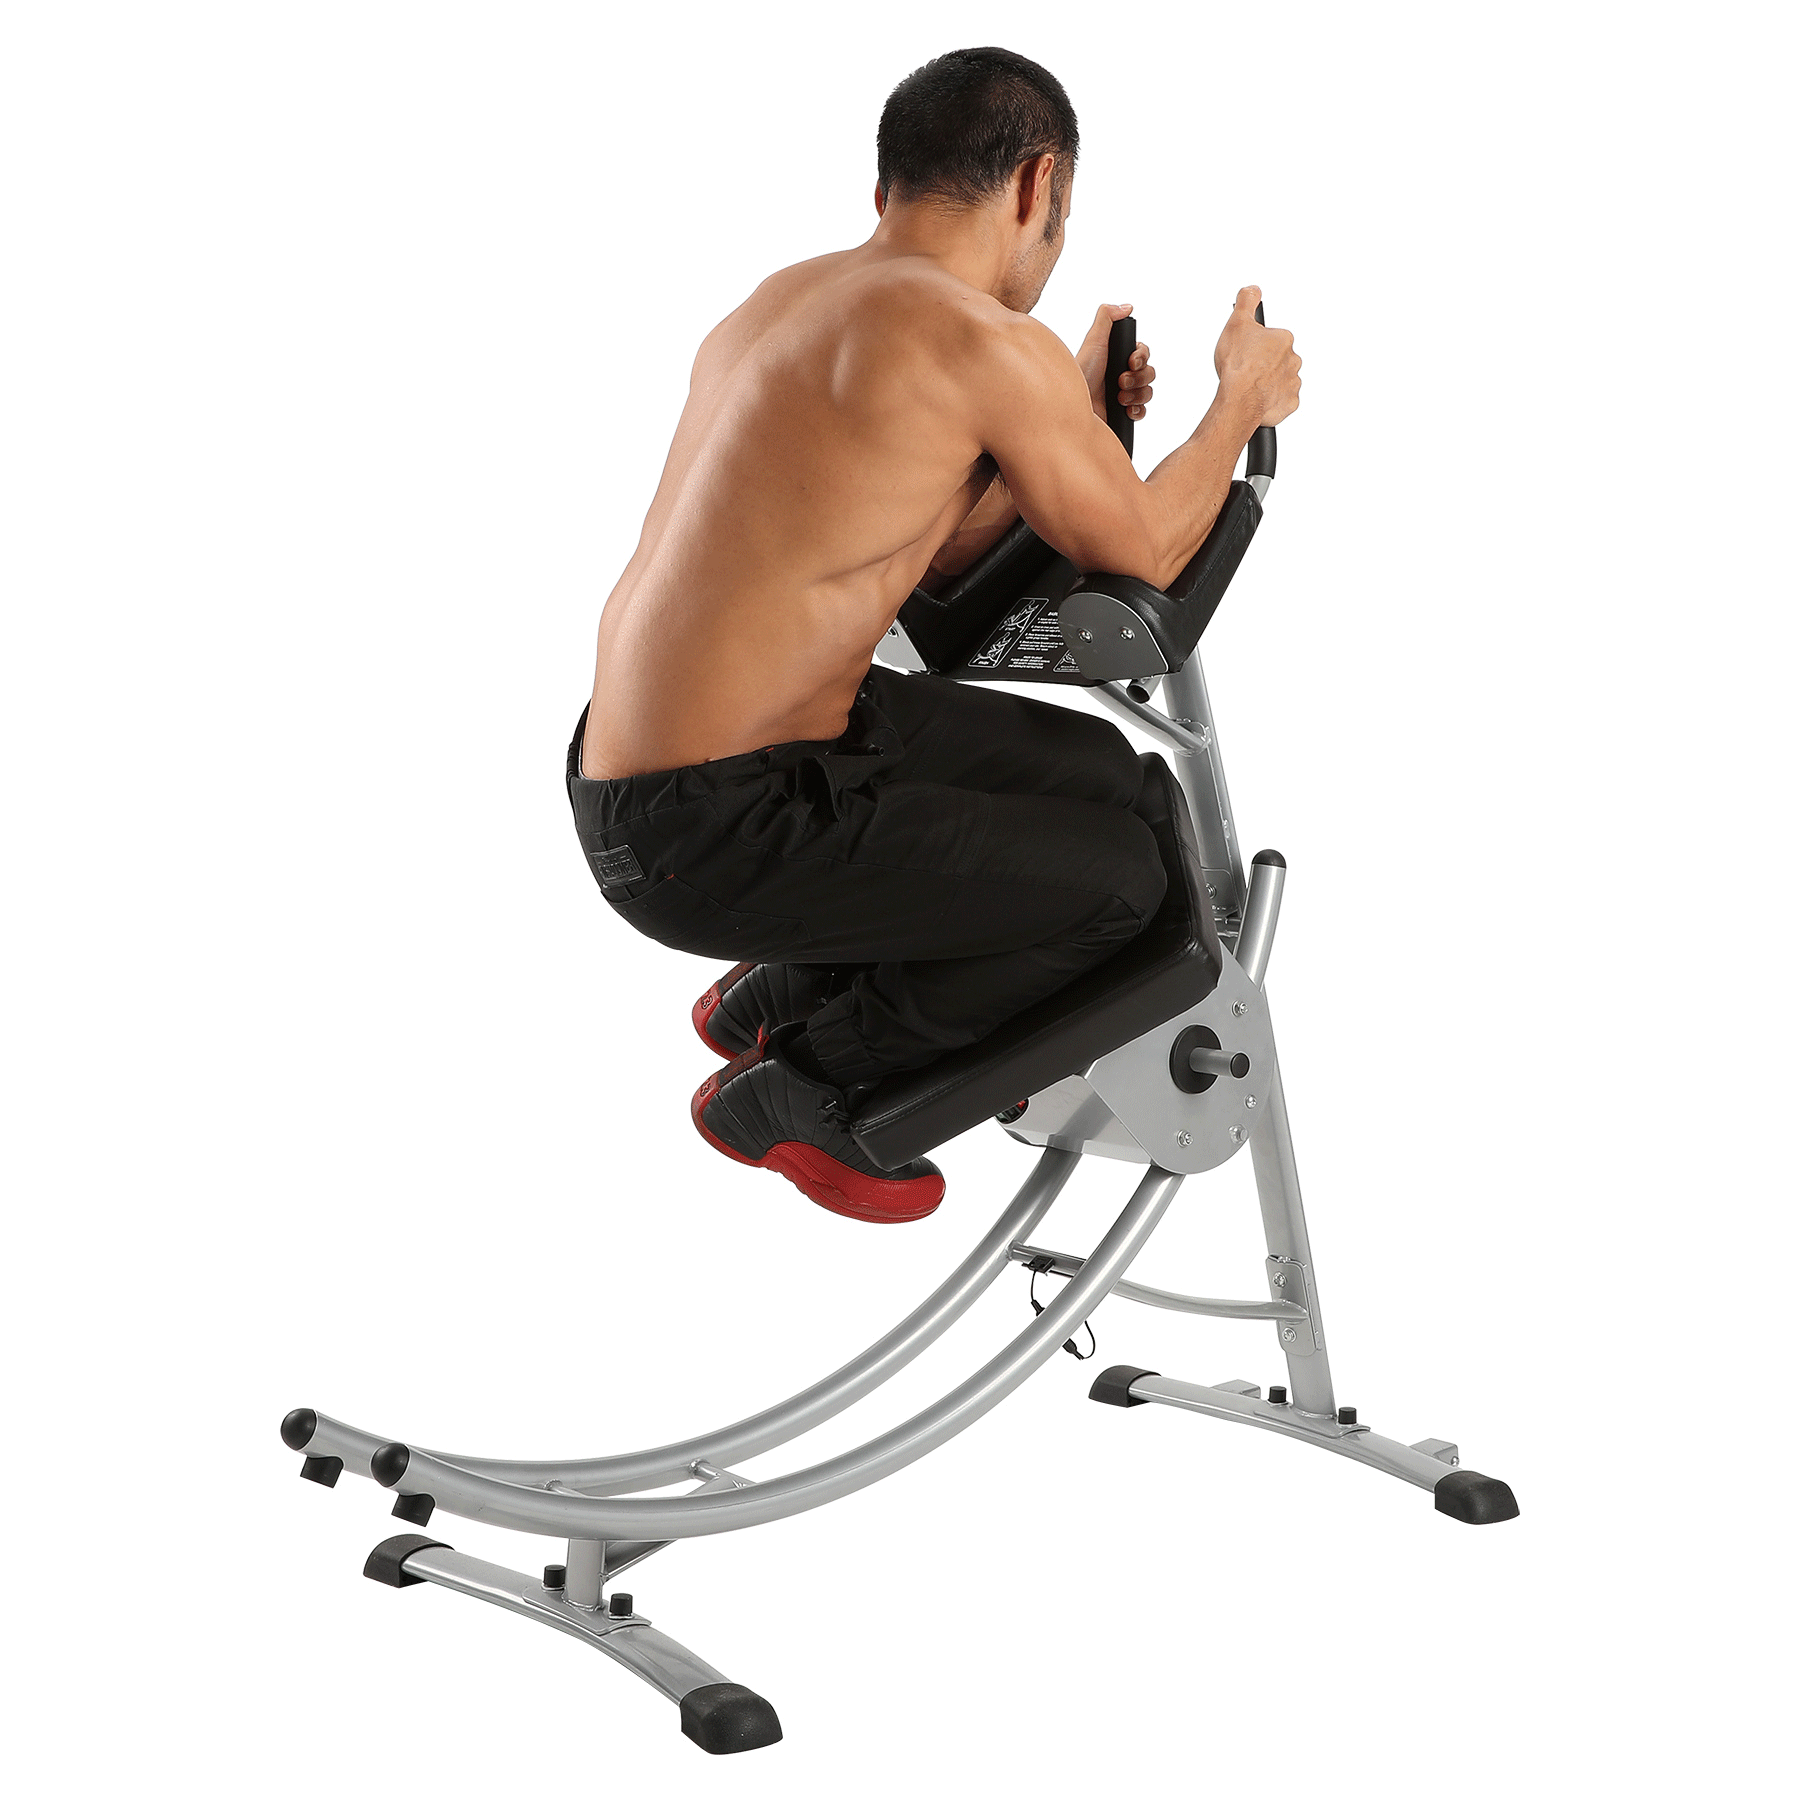 Details about   Abs ​Crunch Abdominal Exercise Machine Ab Coaster Fitness Body Muscle Workout US 